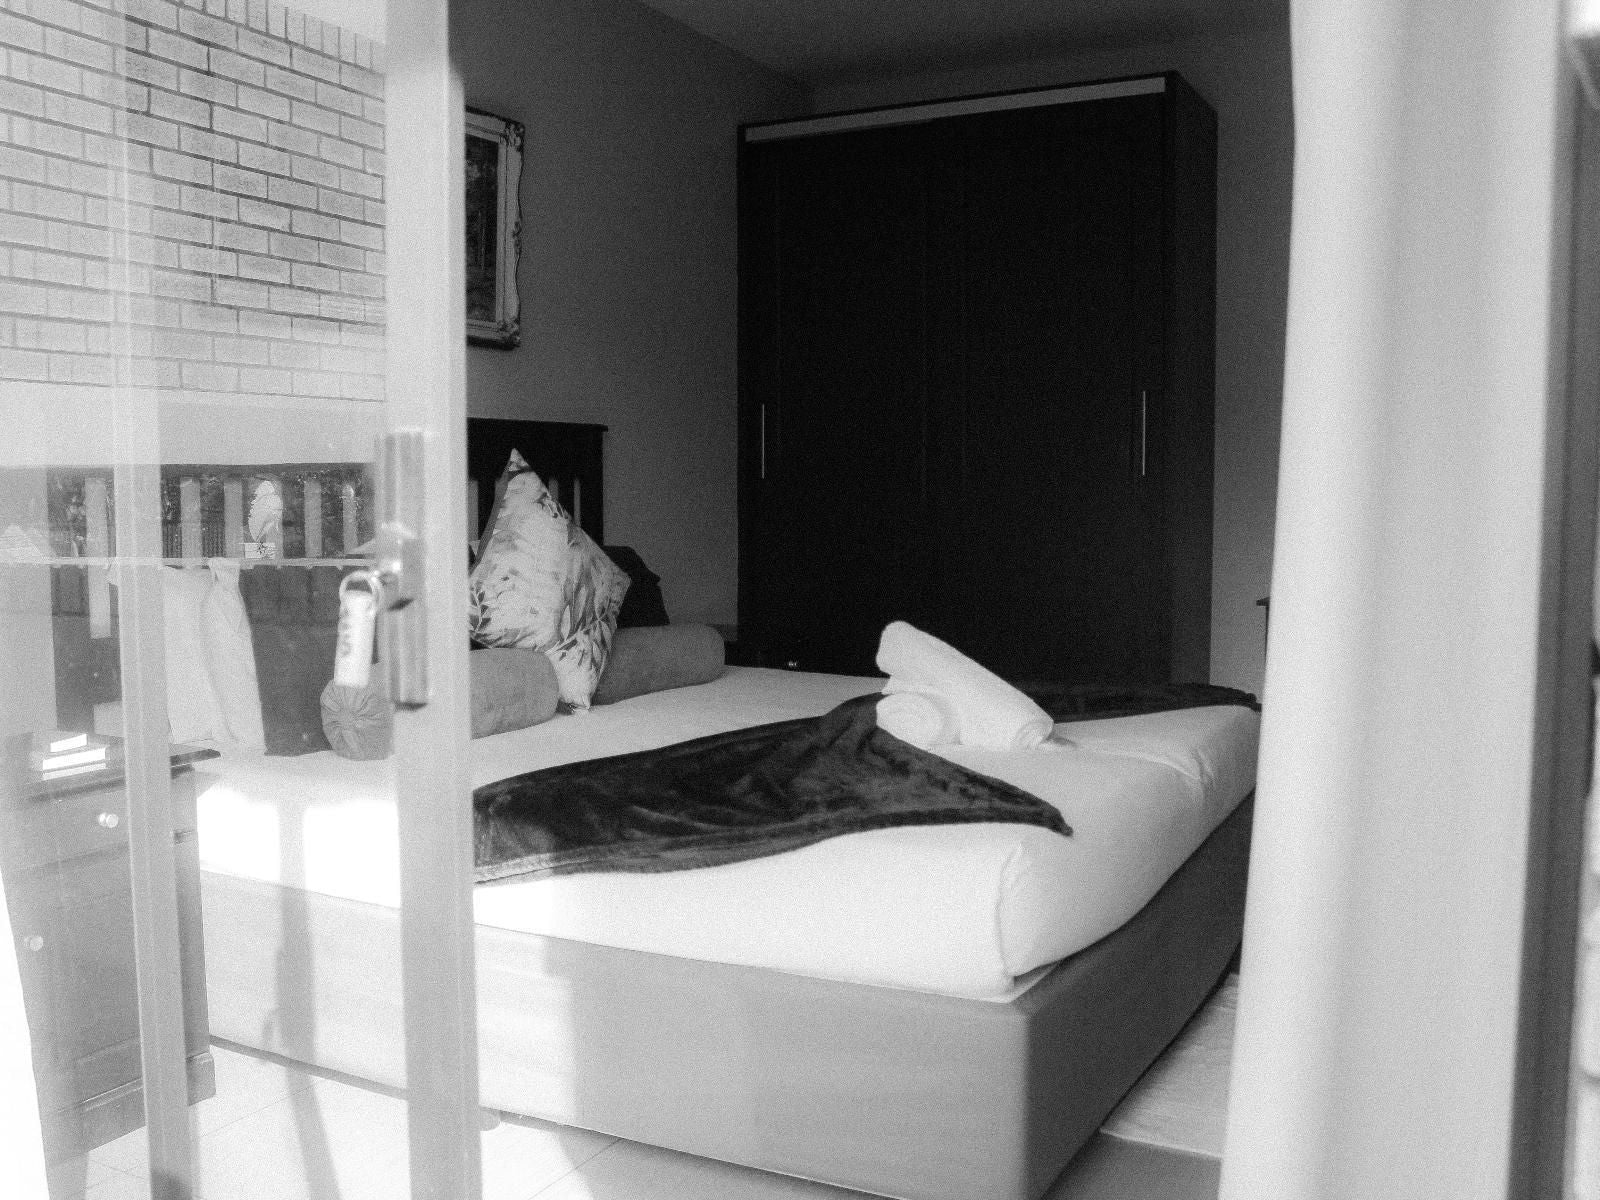 Ansteys Square Ocean View Durban Durban Kwazulu Natal South Africa Colorless, Black And White, Bedroom